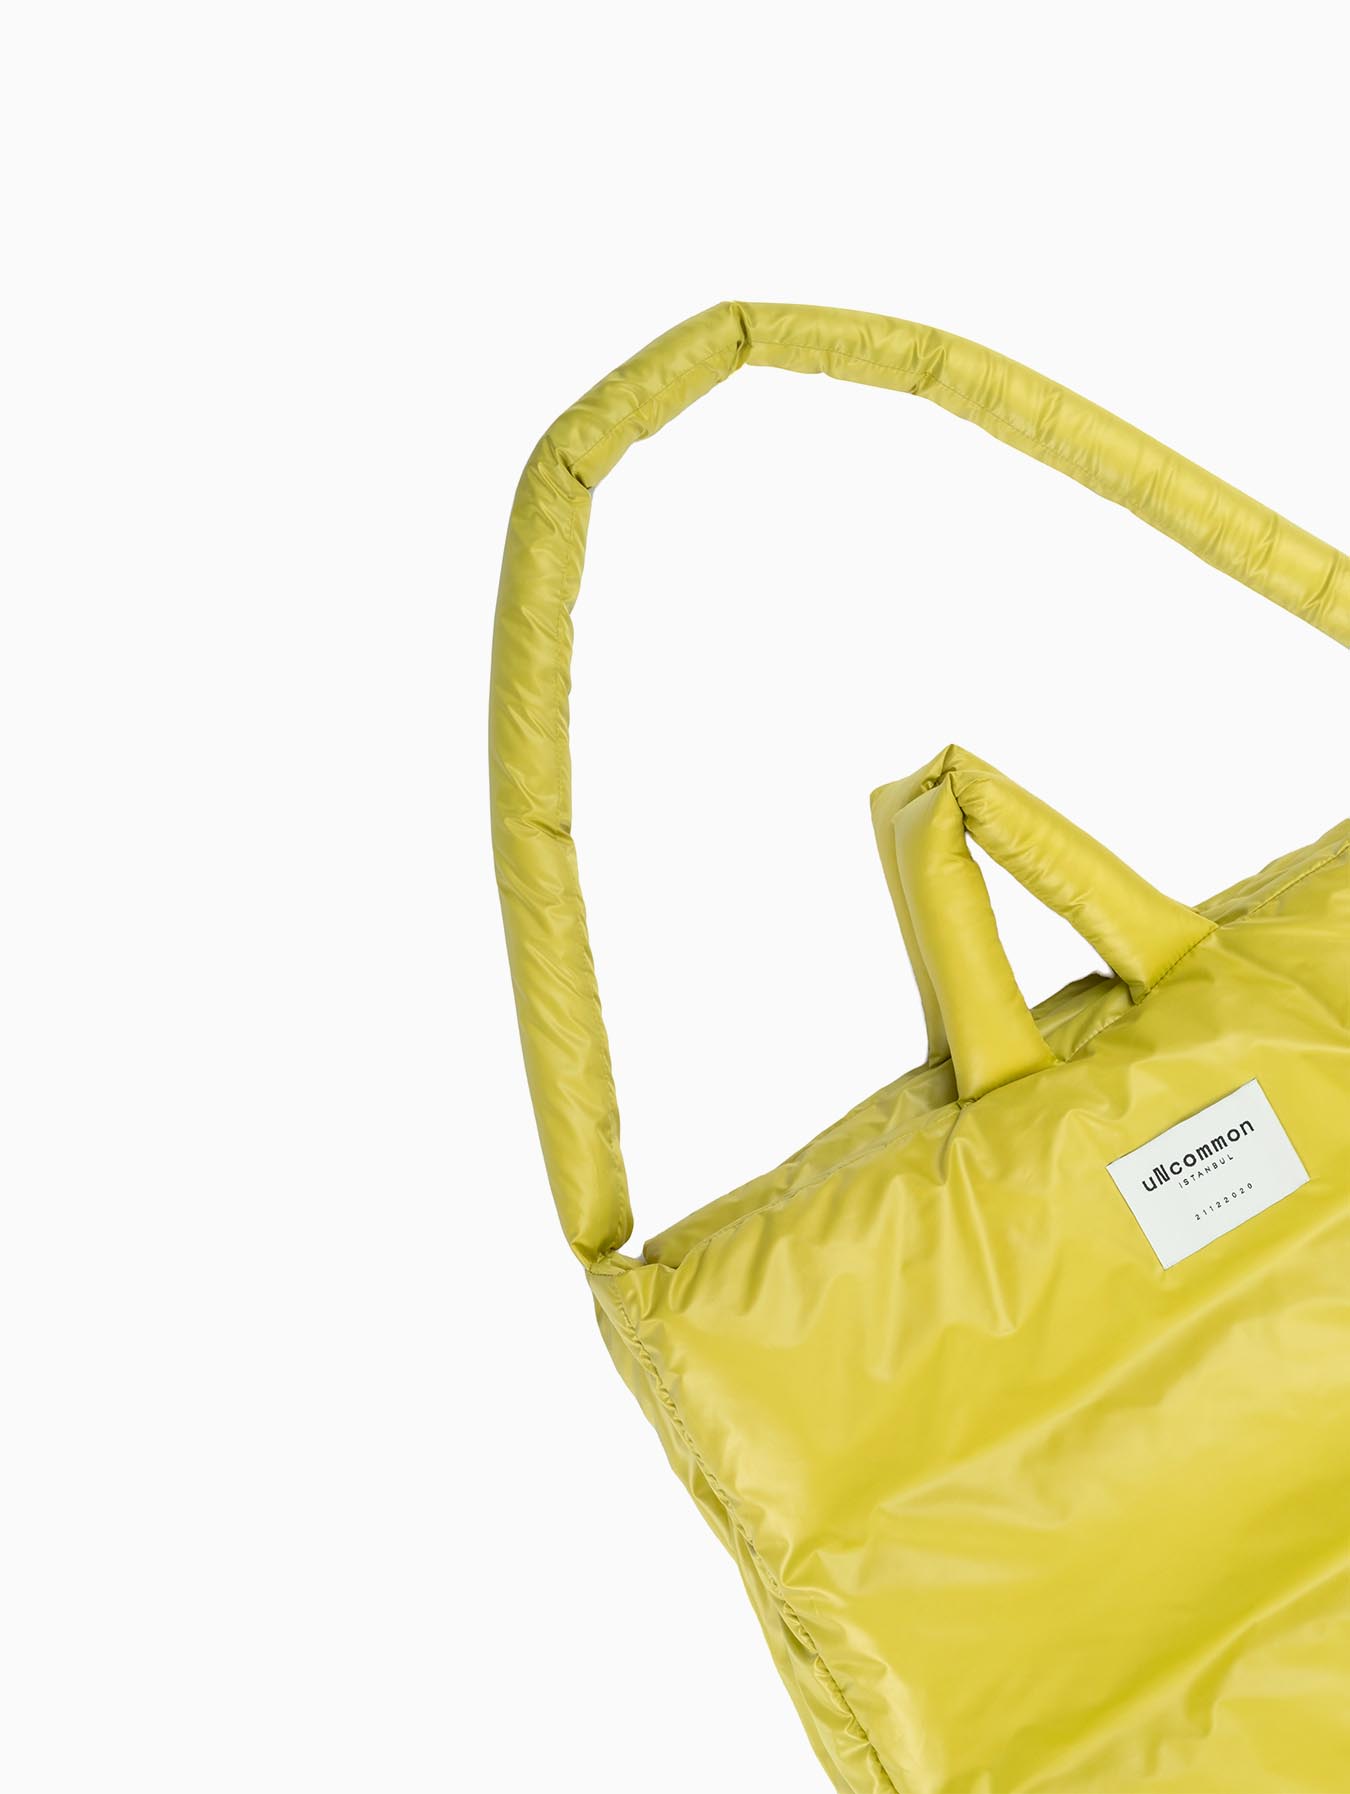 uNcommon Istanbul - Puffy Tote Bag Mustard